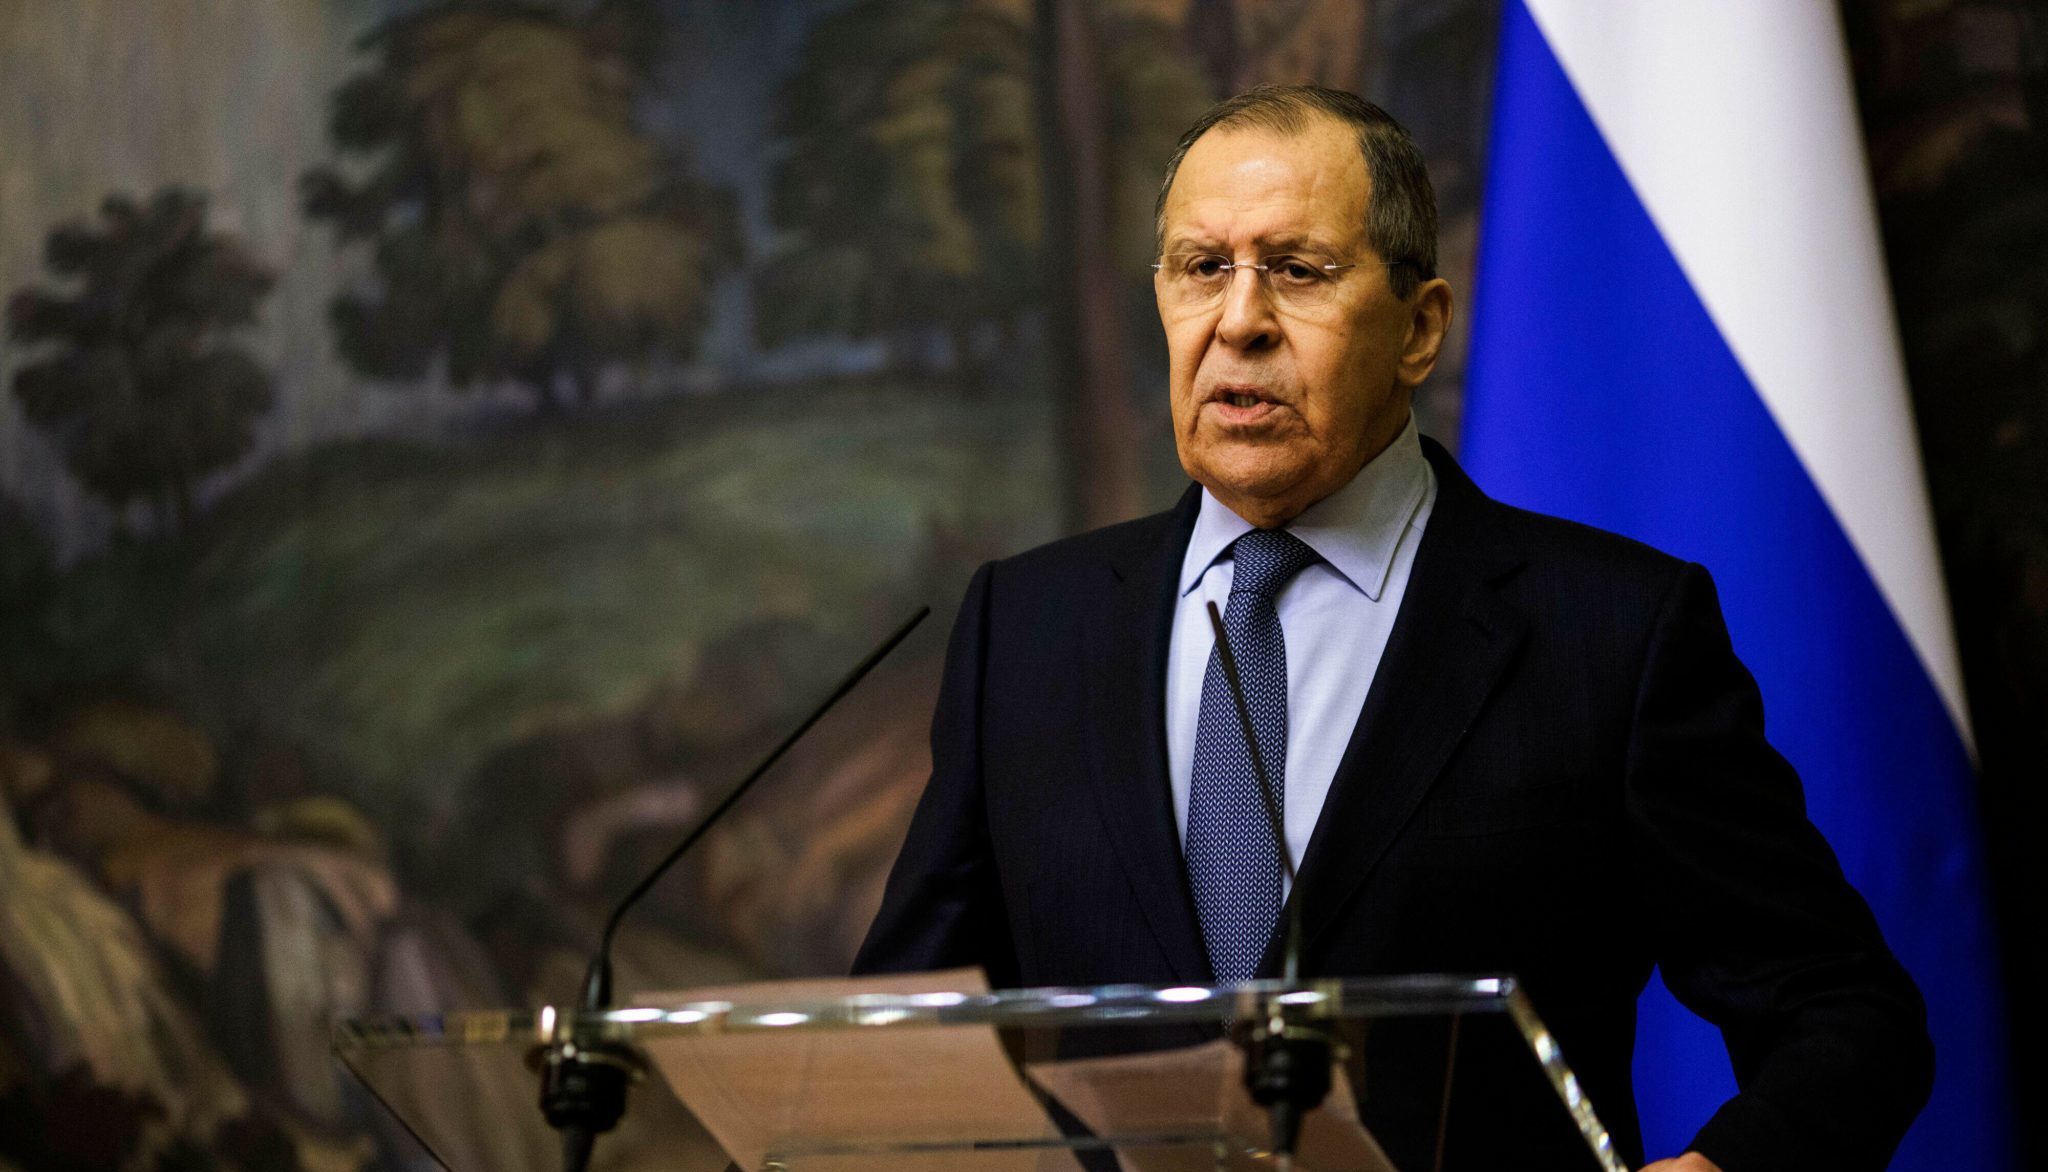 Foreign Affairs Minister for Russian, Sergei Lavrov, speaking in Moscow in January 2022.